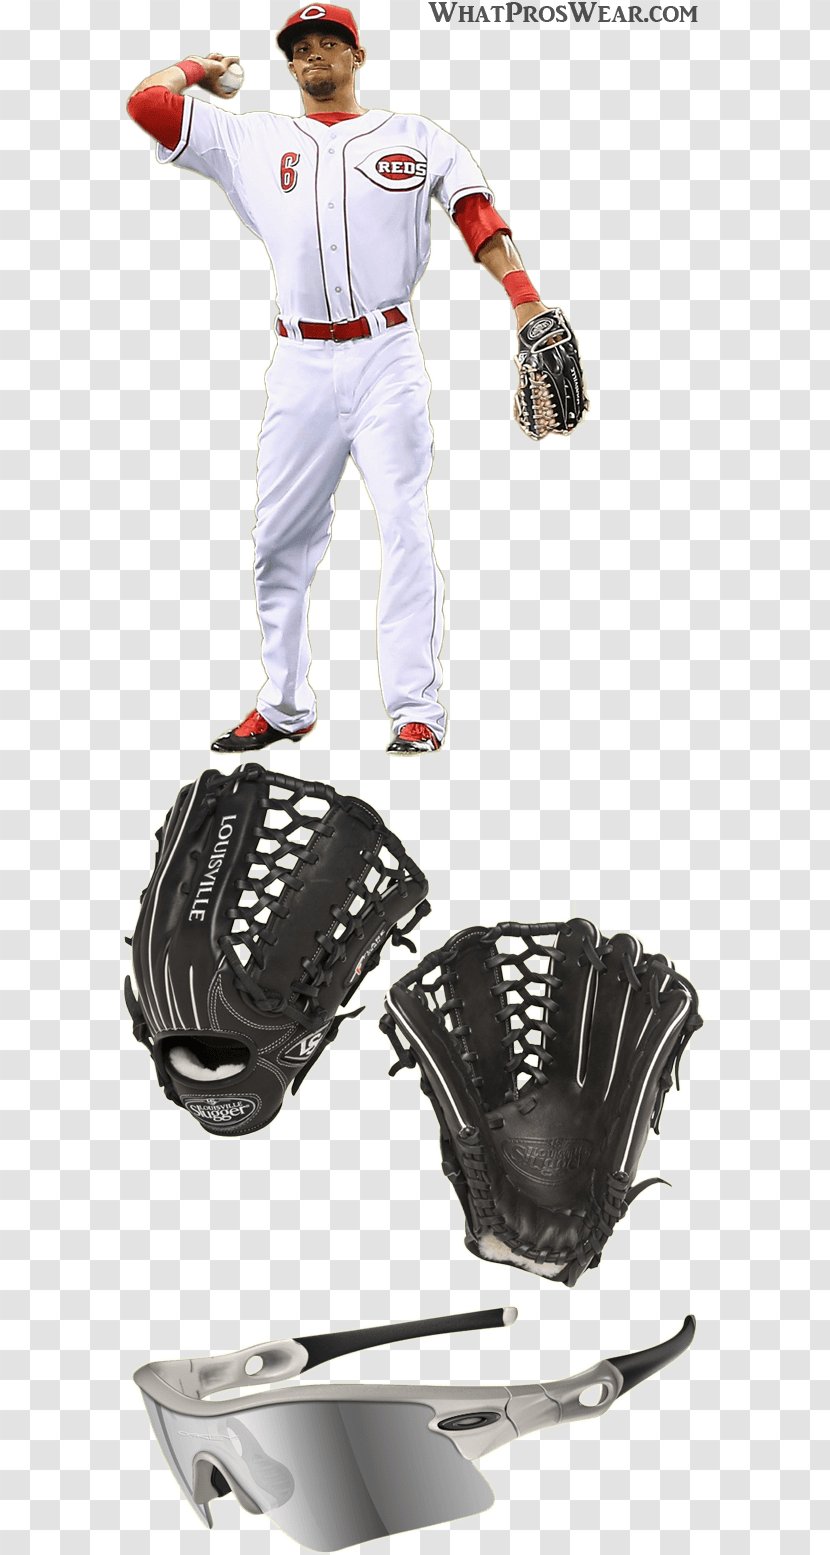 Protective Gear In Sports Baseball Glove Outfielder Hillerich & Bradsby - Infield Transparent PNG